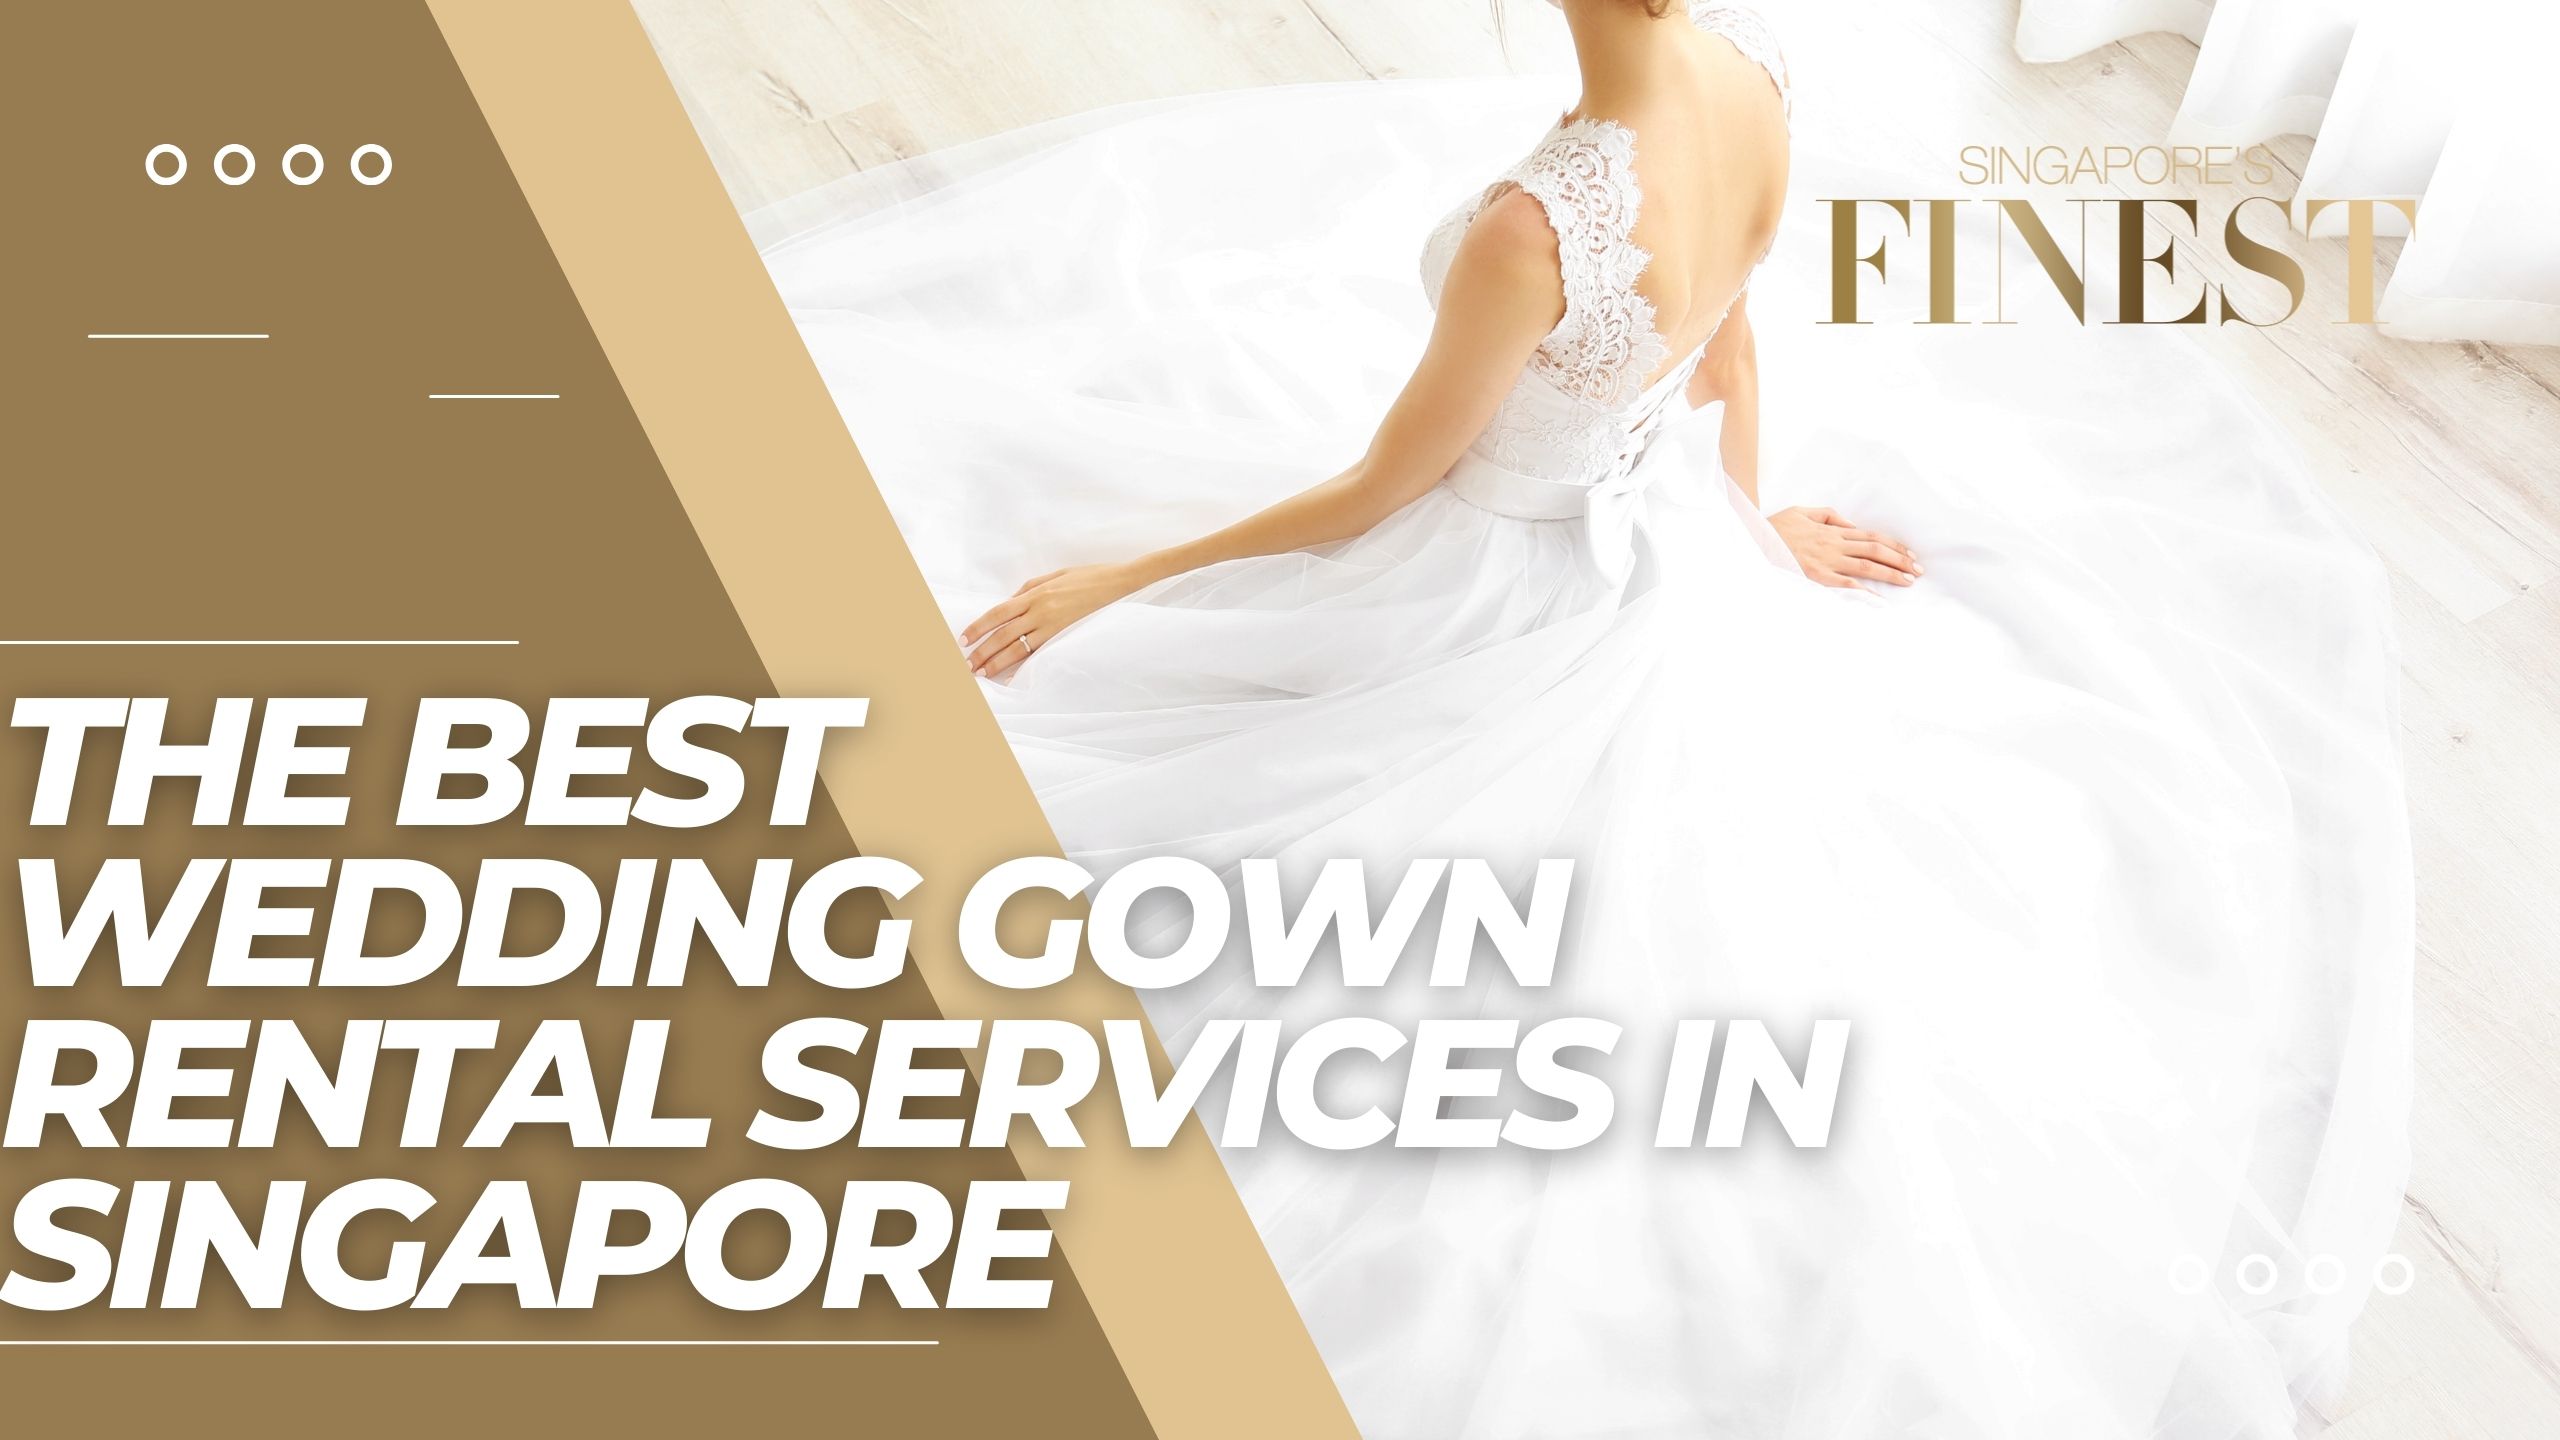 The Finest Wedding Gown Rental Services in Singapore